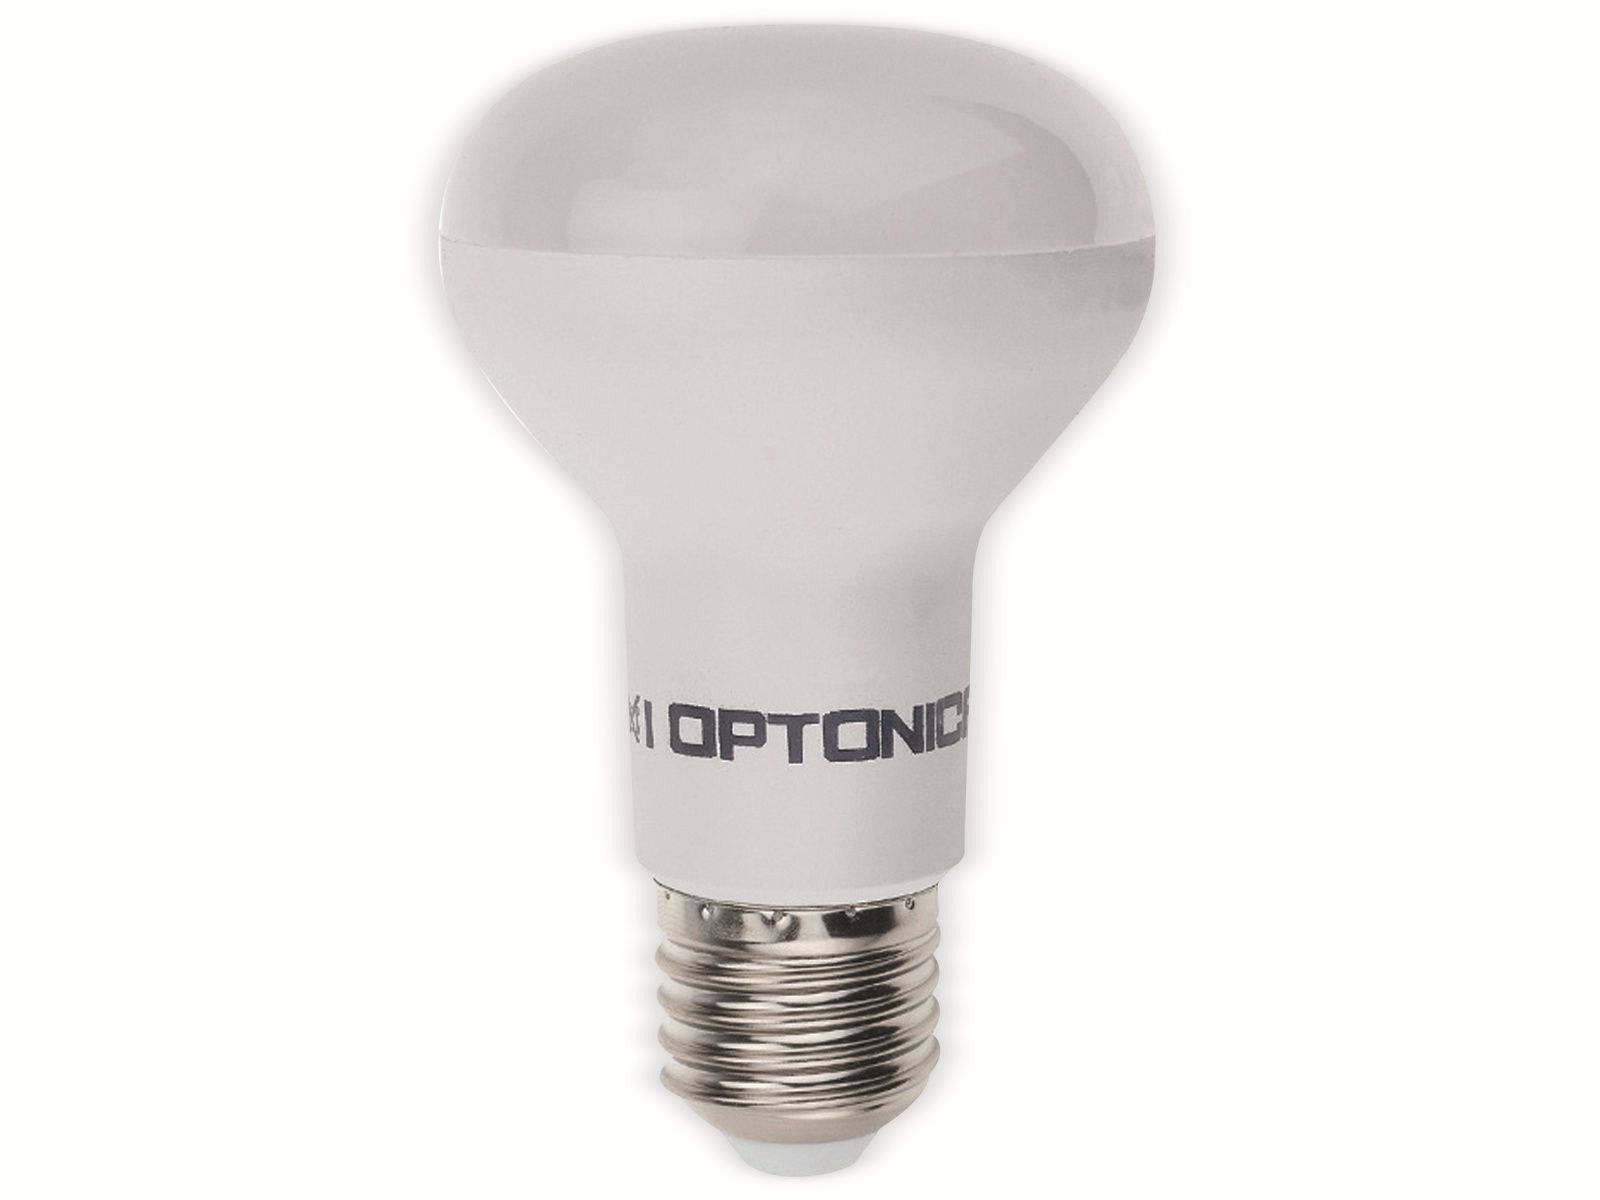 OPTONICA LED-Lampe 1877, E27, R63, EEK G, 6W, 480 lm, 4500 K von Optonica